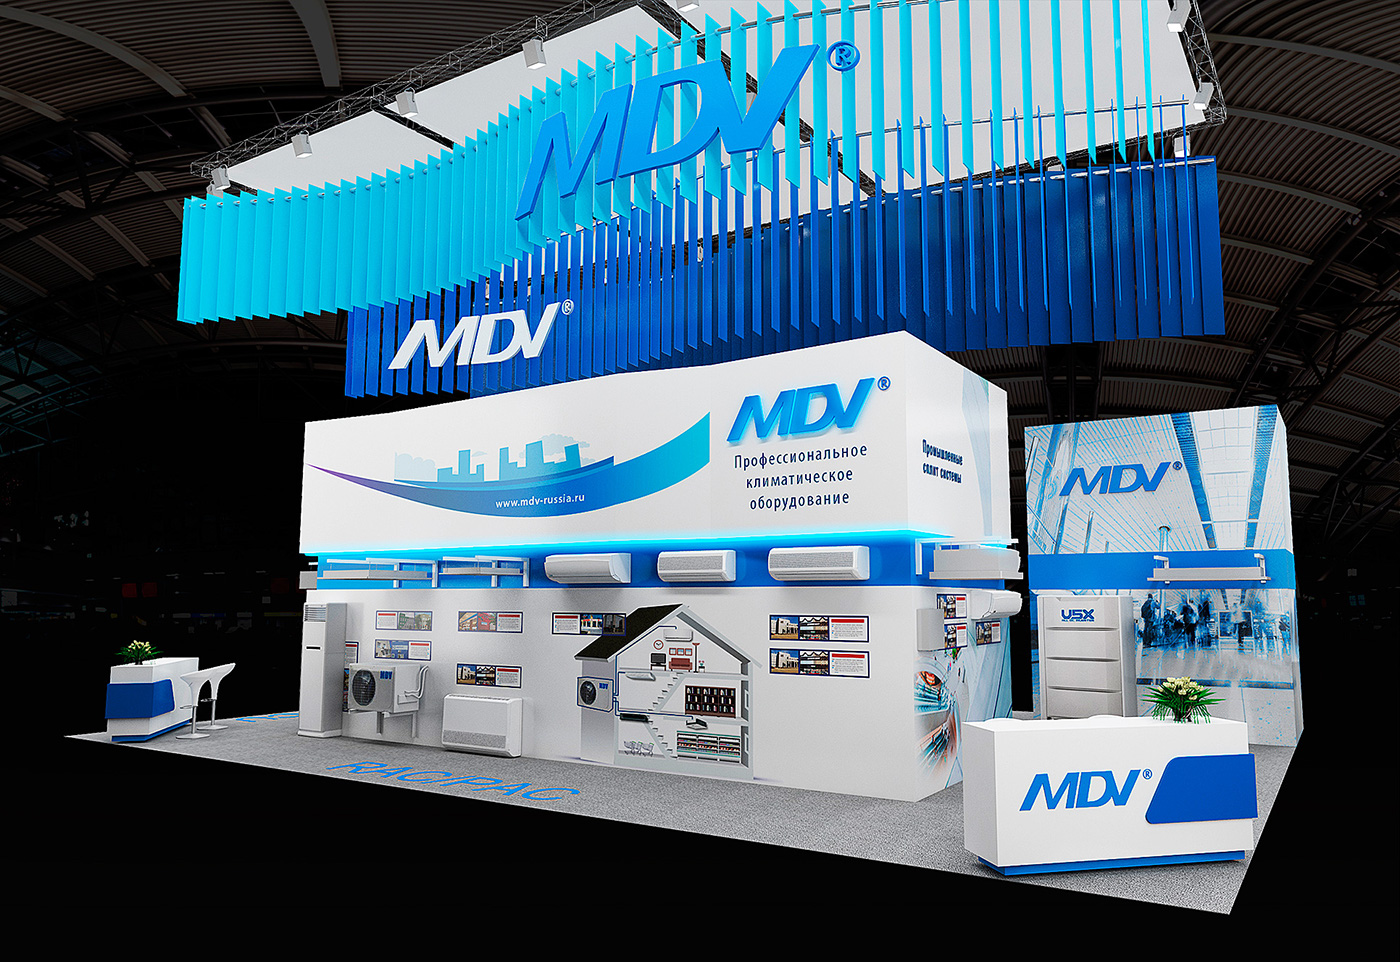 mdv Exhibition Booth exhibition stand Exhibition Design  booth design Stand climate world дизайн выставочного стенда проект выставочного стенда выставочный дизайн